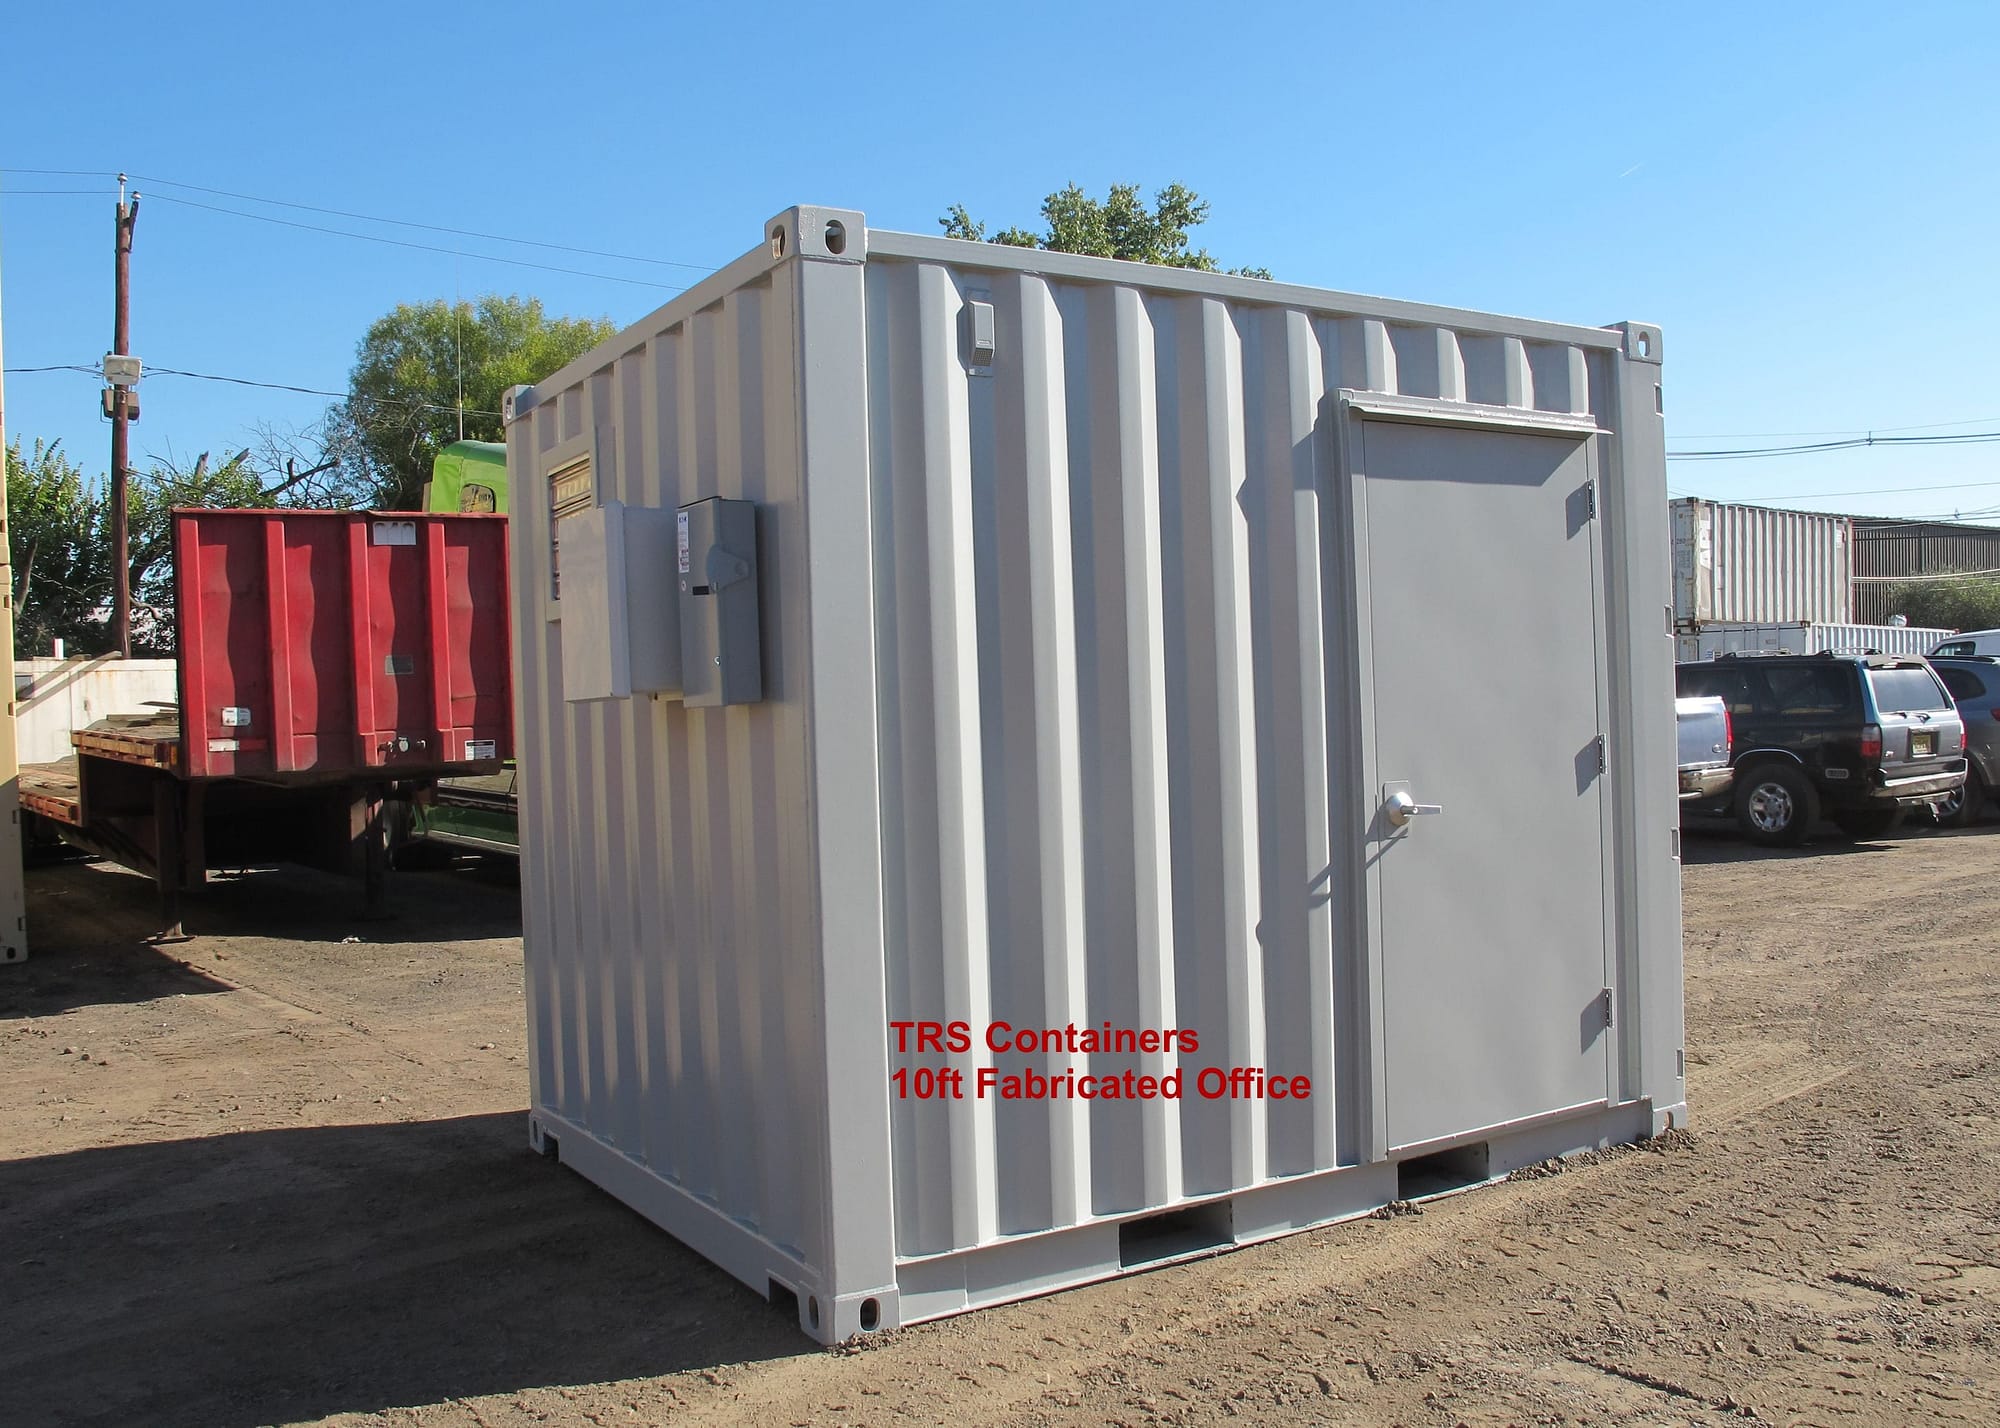 TRS Containers rents and sells modified container offices eqiupped with paneling, hvac, doors, vents, windows